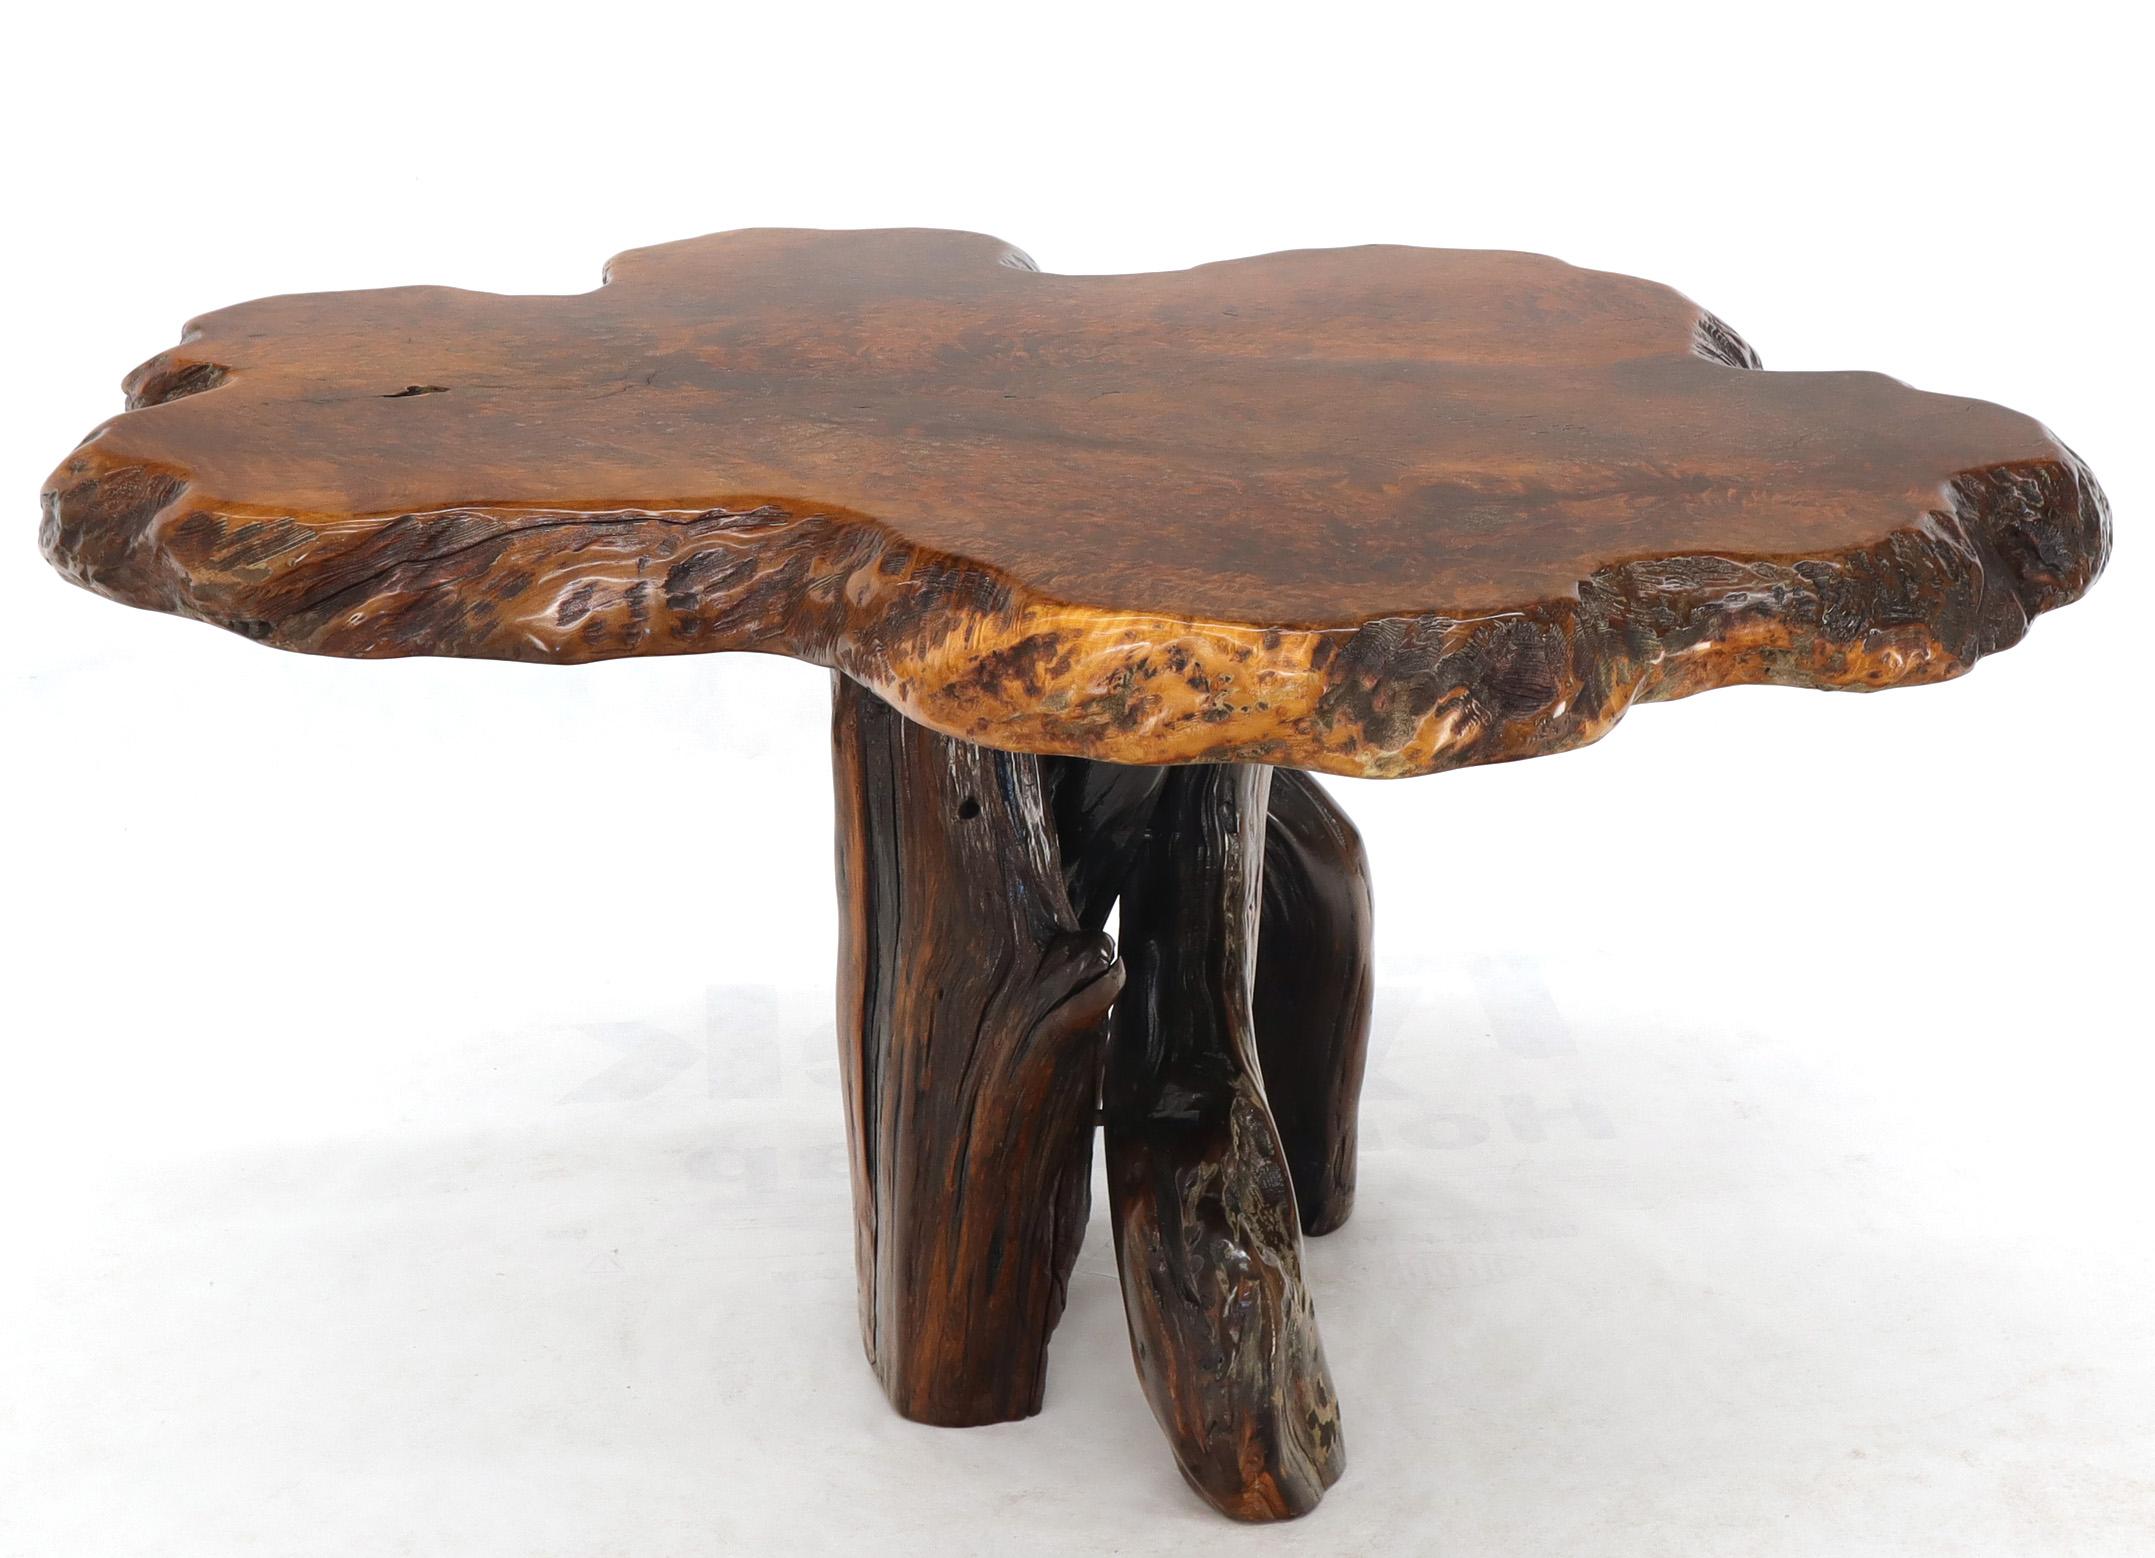 Burl Wood Natural Free Edge Slab Top Gueridon Center Table In Excellent Condition For Sale In Rockaway, NJ